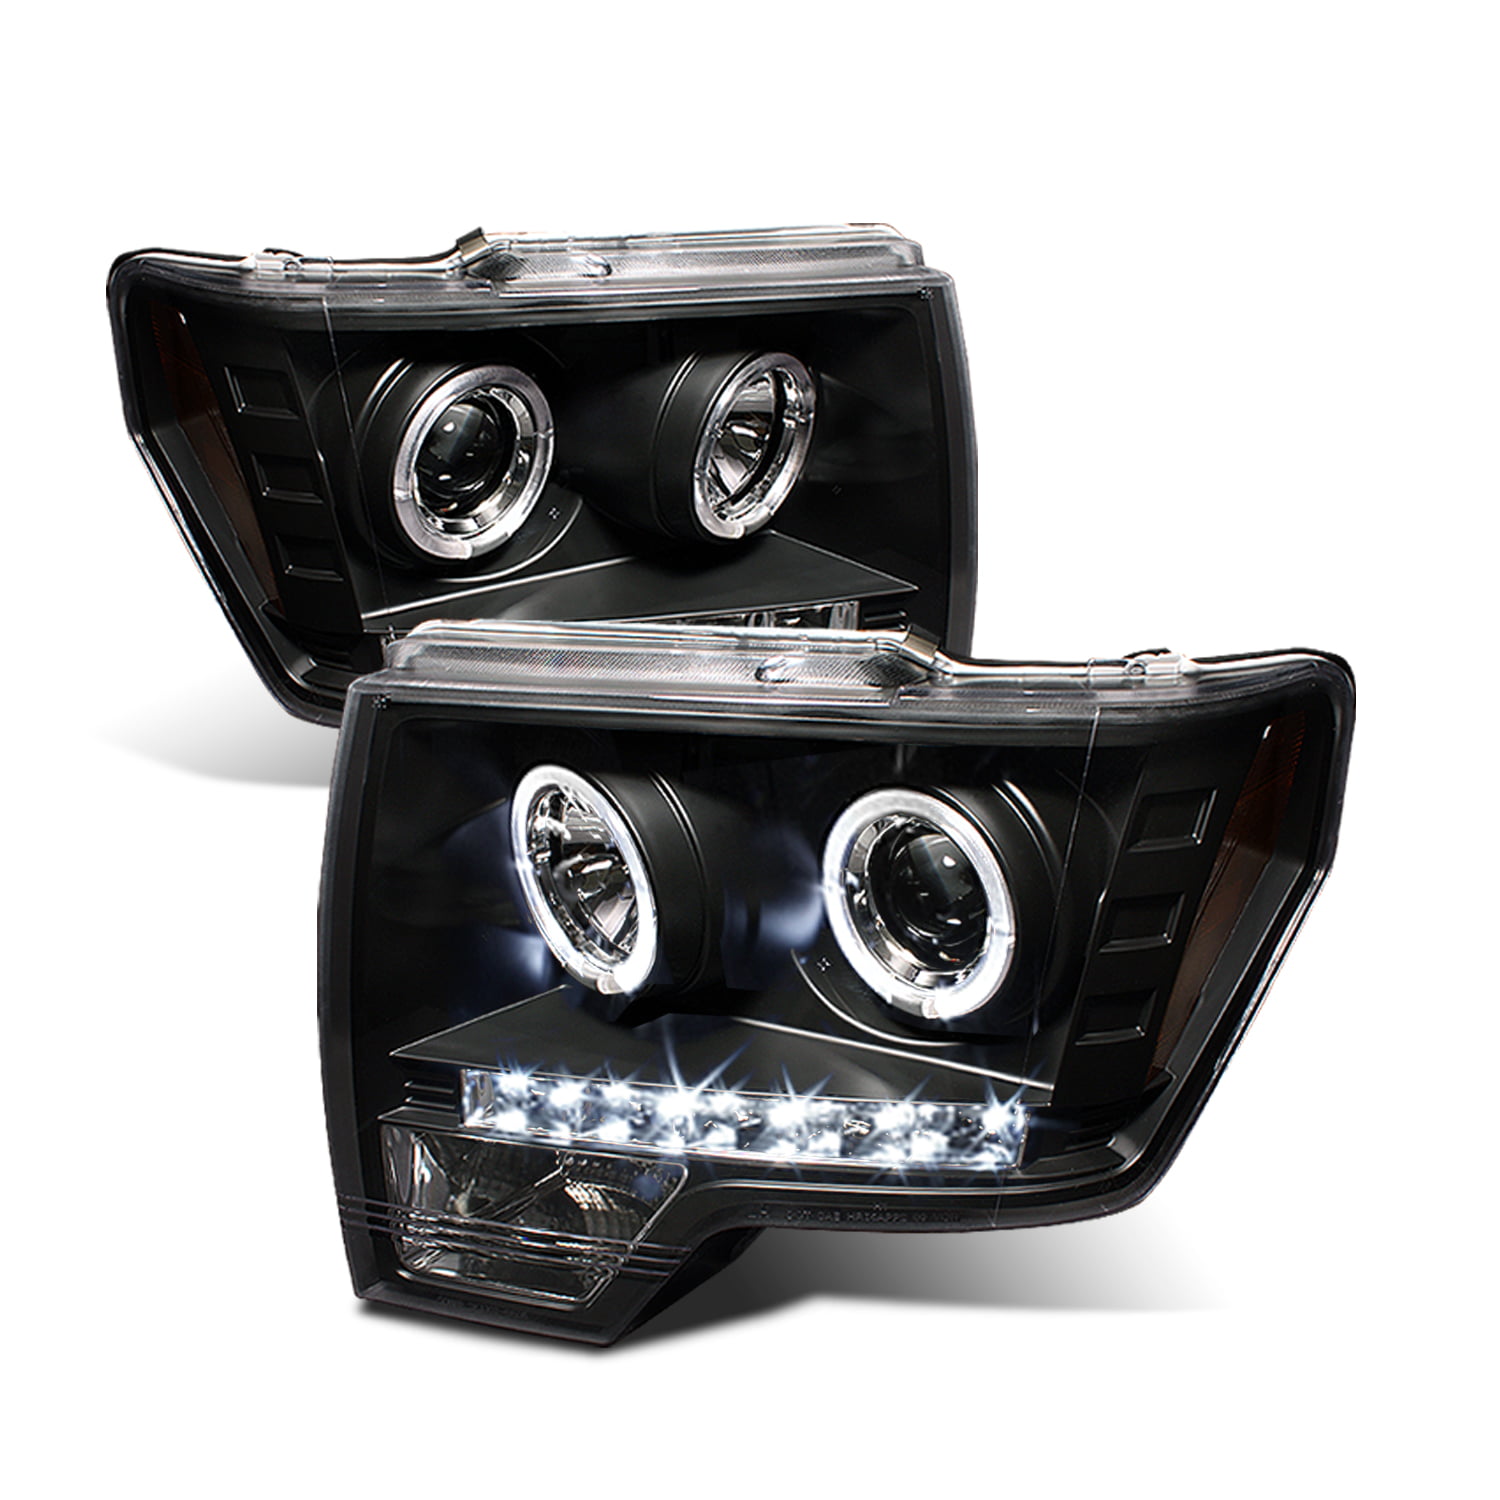 Tail Lamp Set For Ford F150 F-150 Pickup Black Bezel Dual Halo LED G2 Projector Headlights